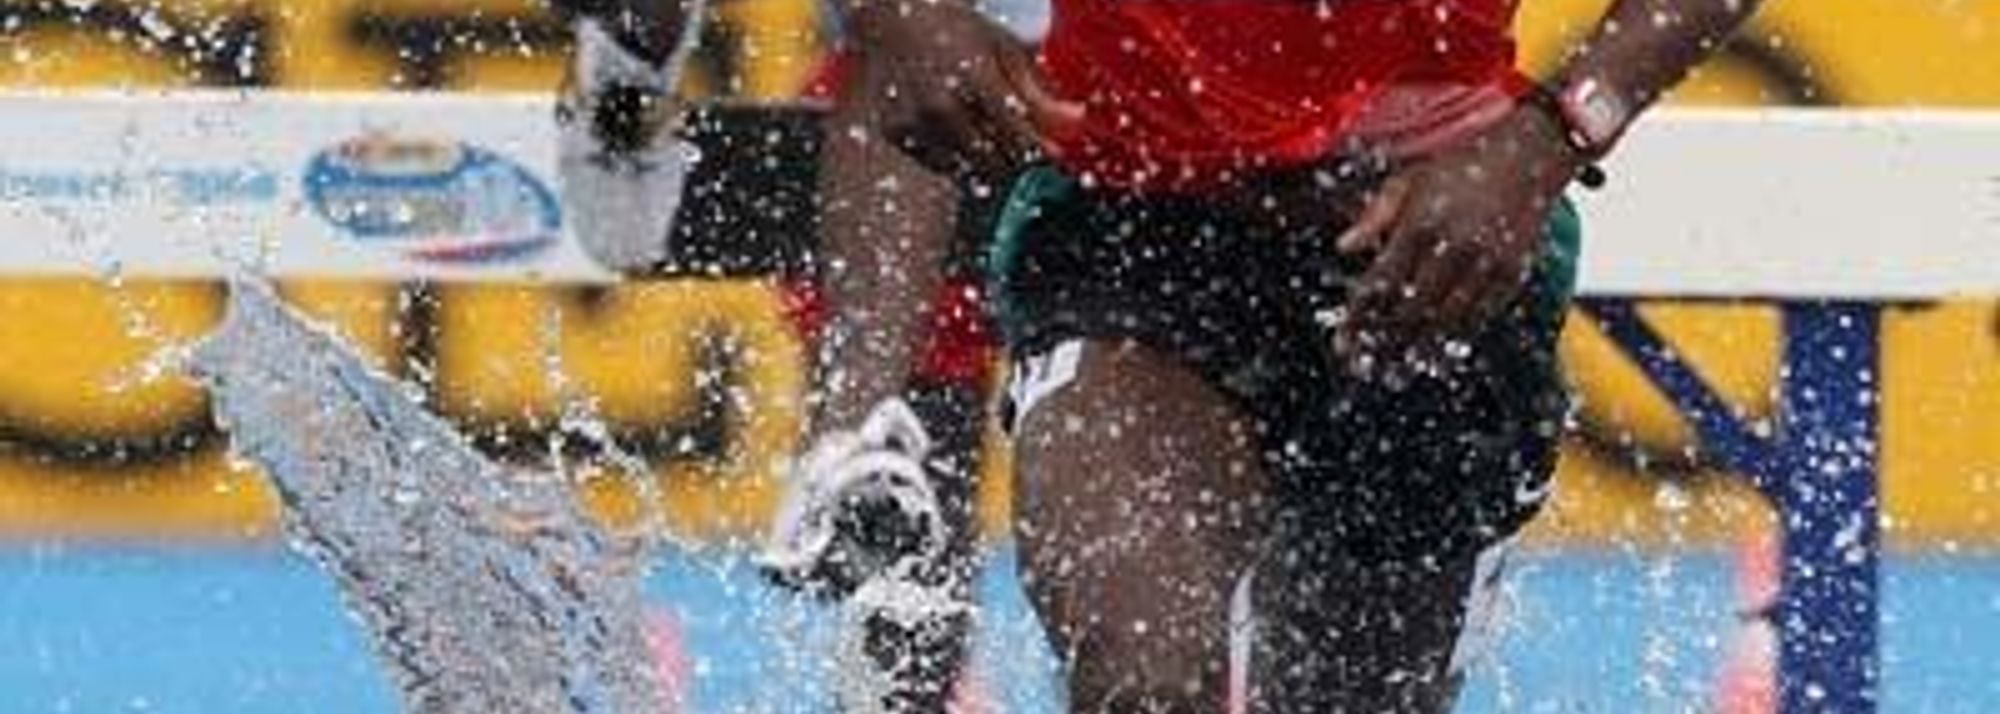 One month ago Boniface Teren took over as Kenyan national steeplechase coach and in that short space of time appears to have transformed Jonathan Muia Ndiku’s technique. That may have proved the key to his victory in a dramatic 3000m steeplechase on Sunday at the World Junior Championships.